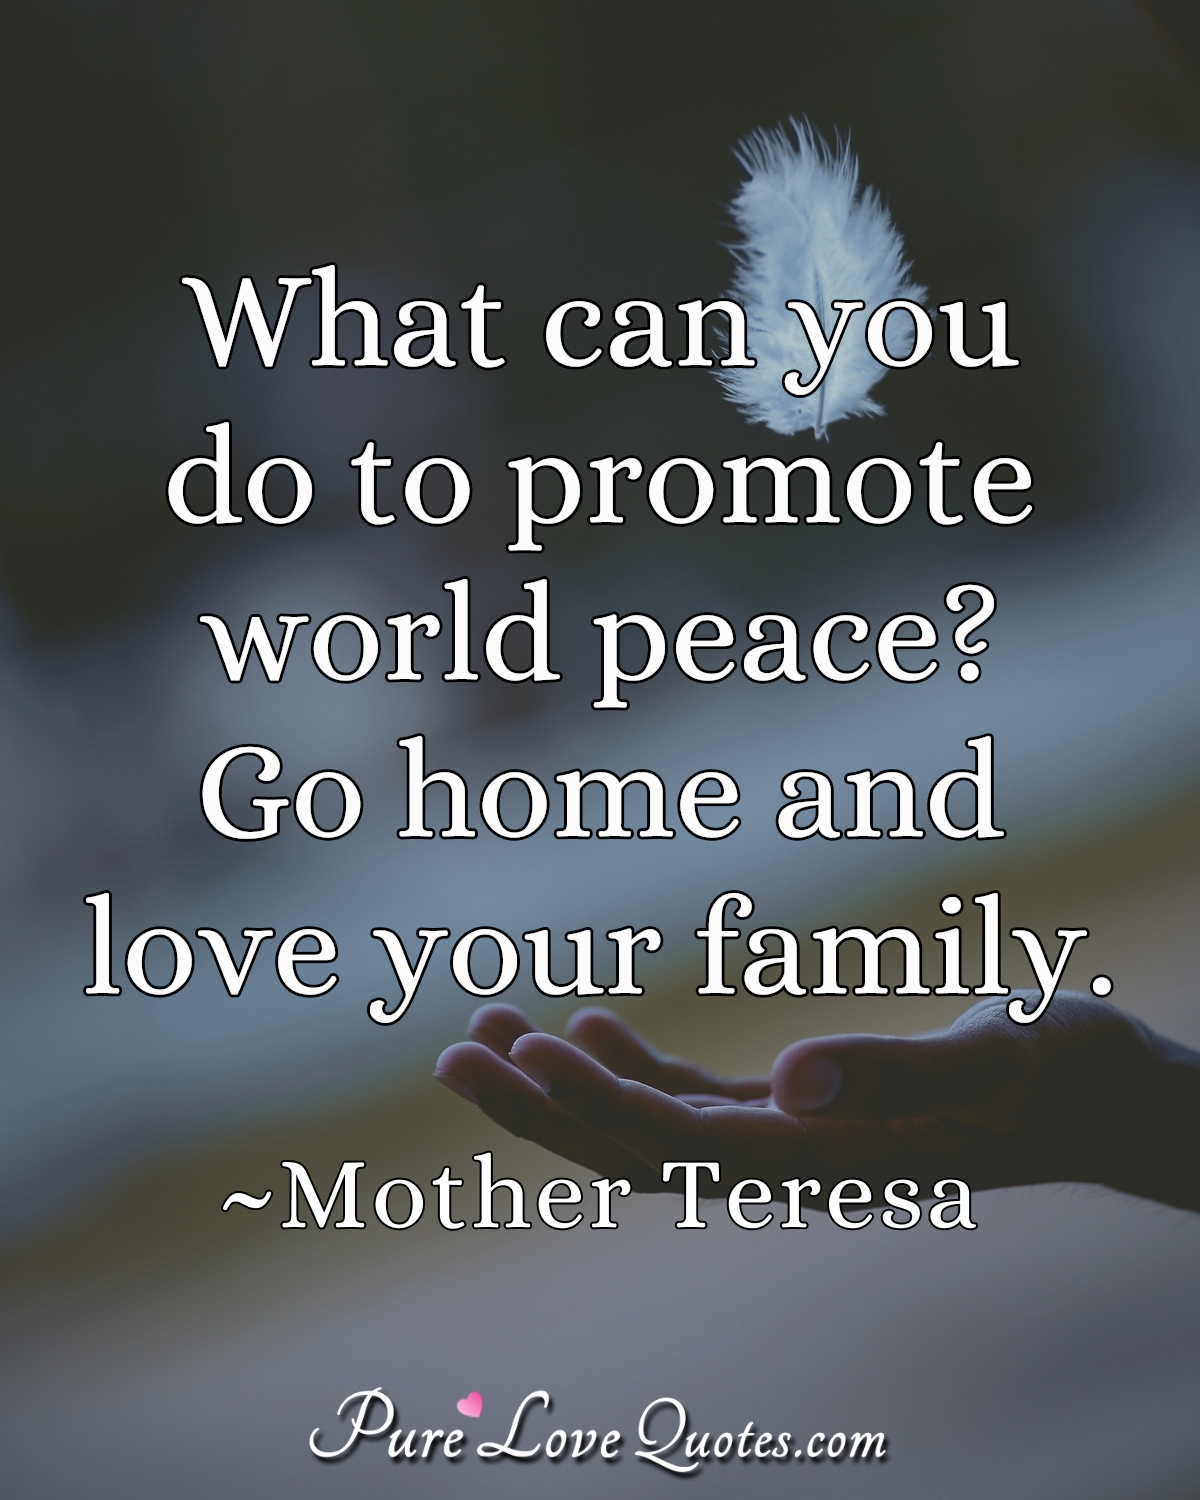 What can you do to promote world peace? Go home and love your family. - Mother Teresa